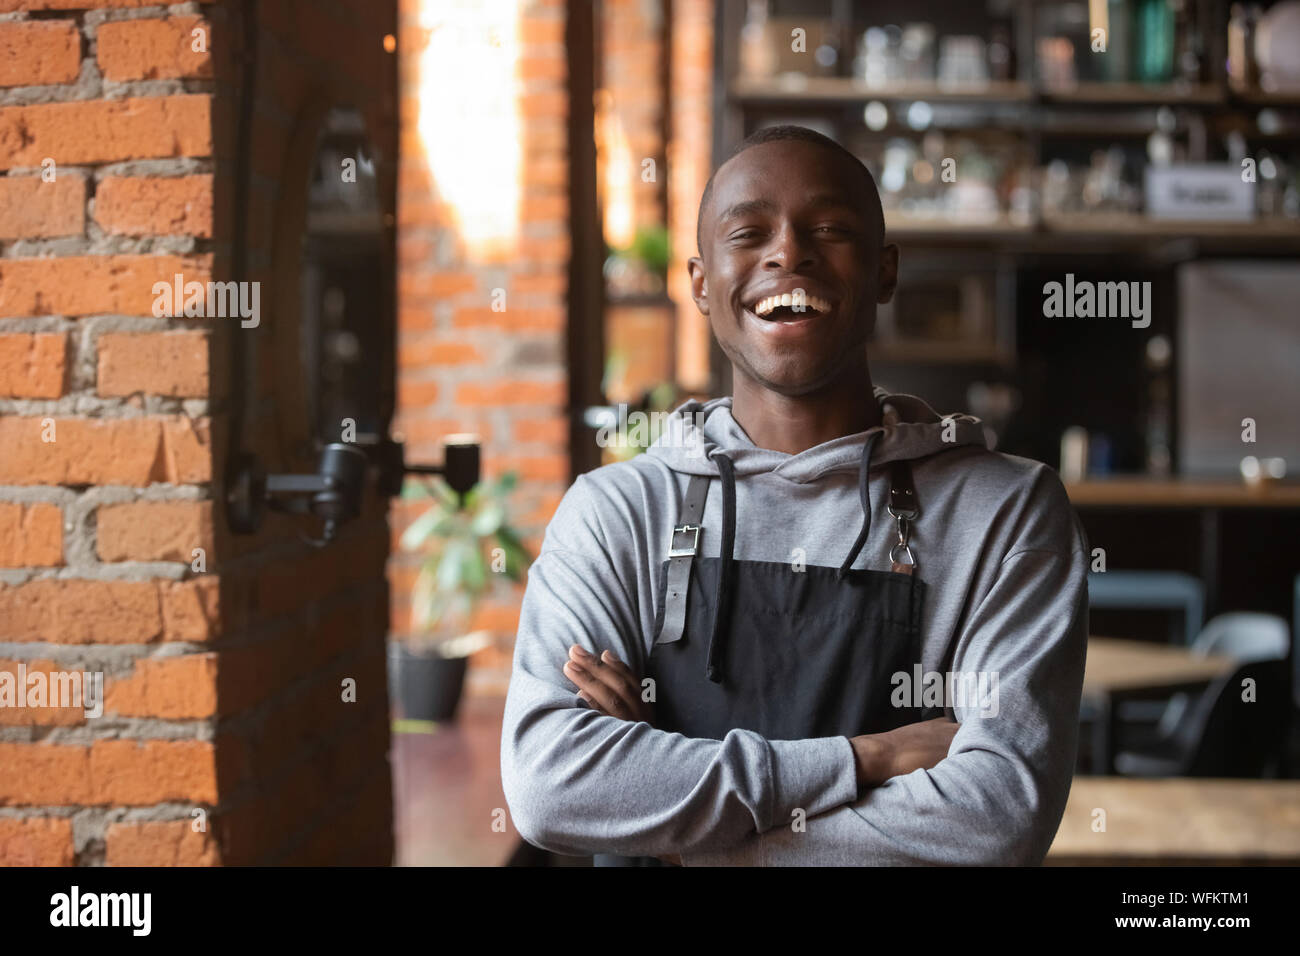 Happy confident african waiter small business owner portrait Stock Photo